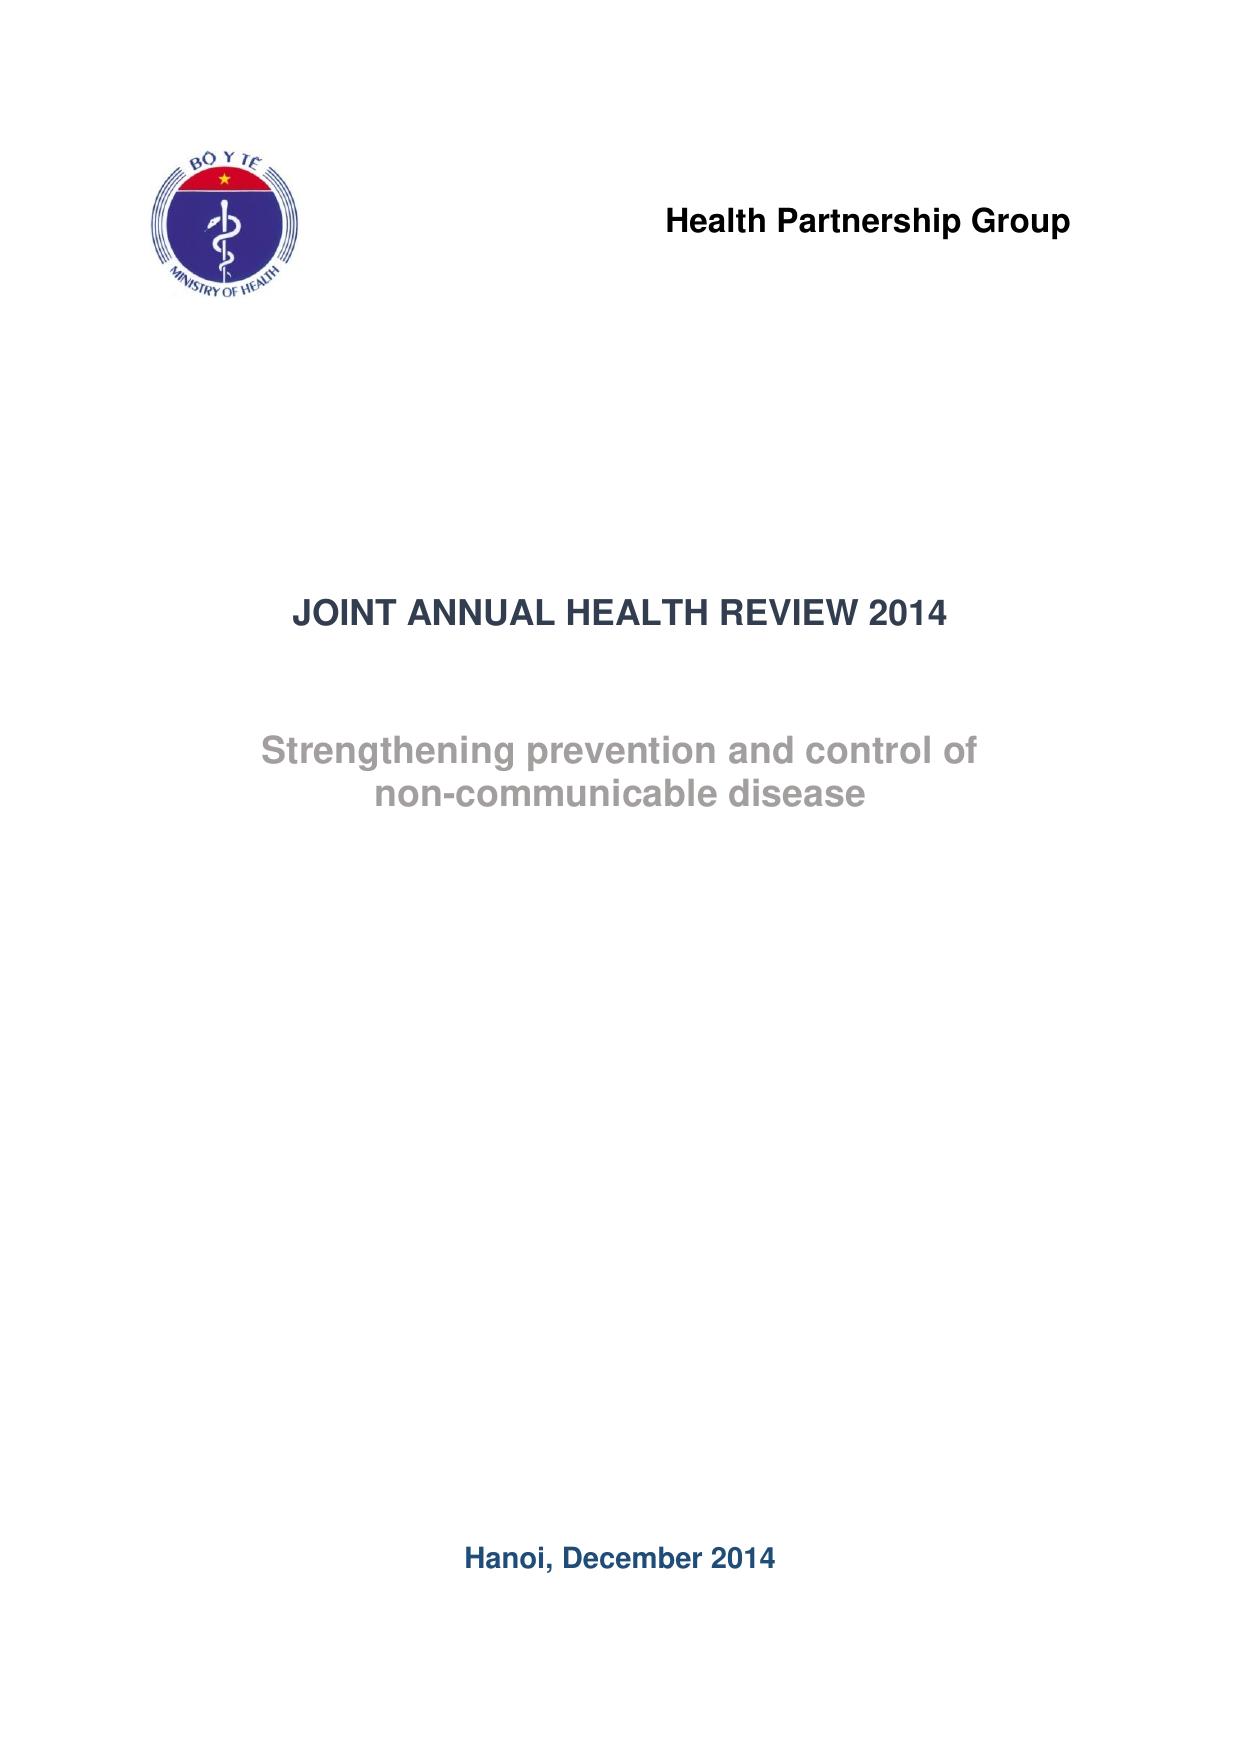 Joint Annual Health Review 2014